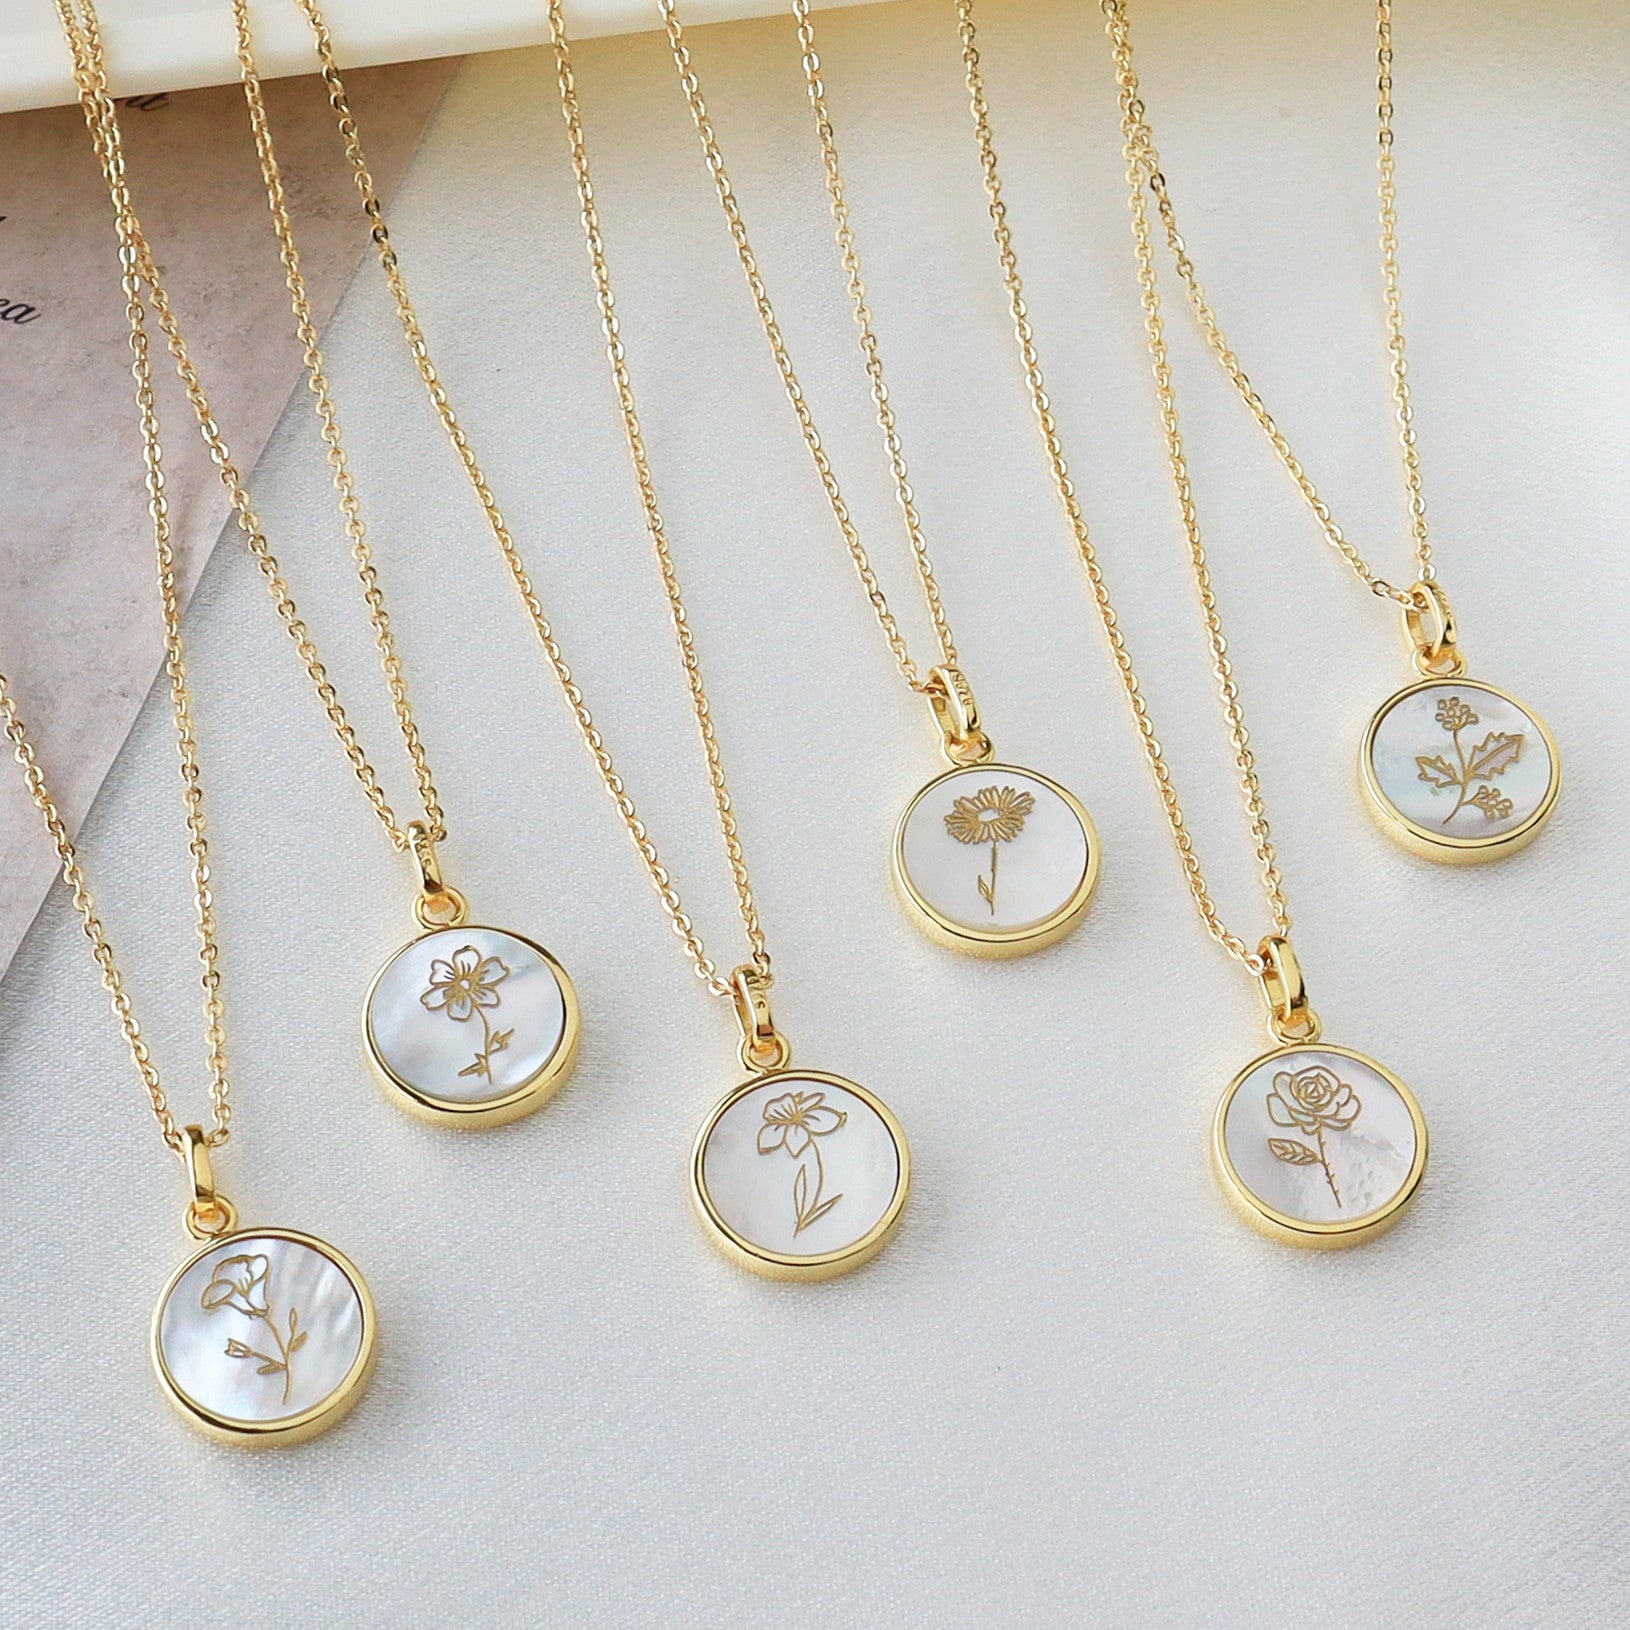 Wholesale Gold Plated Round White Shell Carved Birth Month Flower Pendant Necklace, Natural Shell Jewelry KZ009